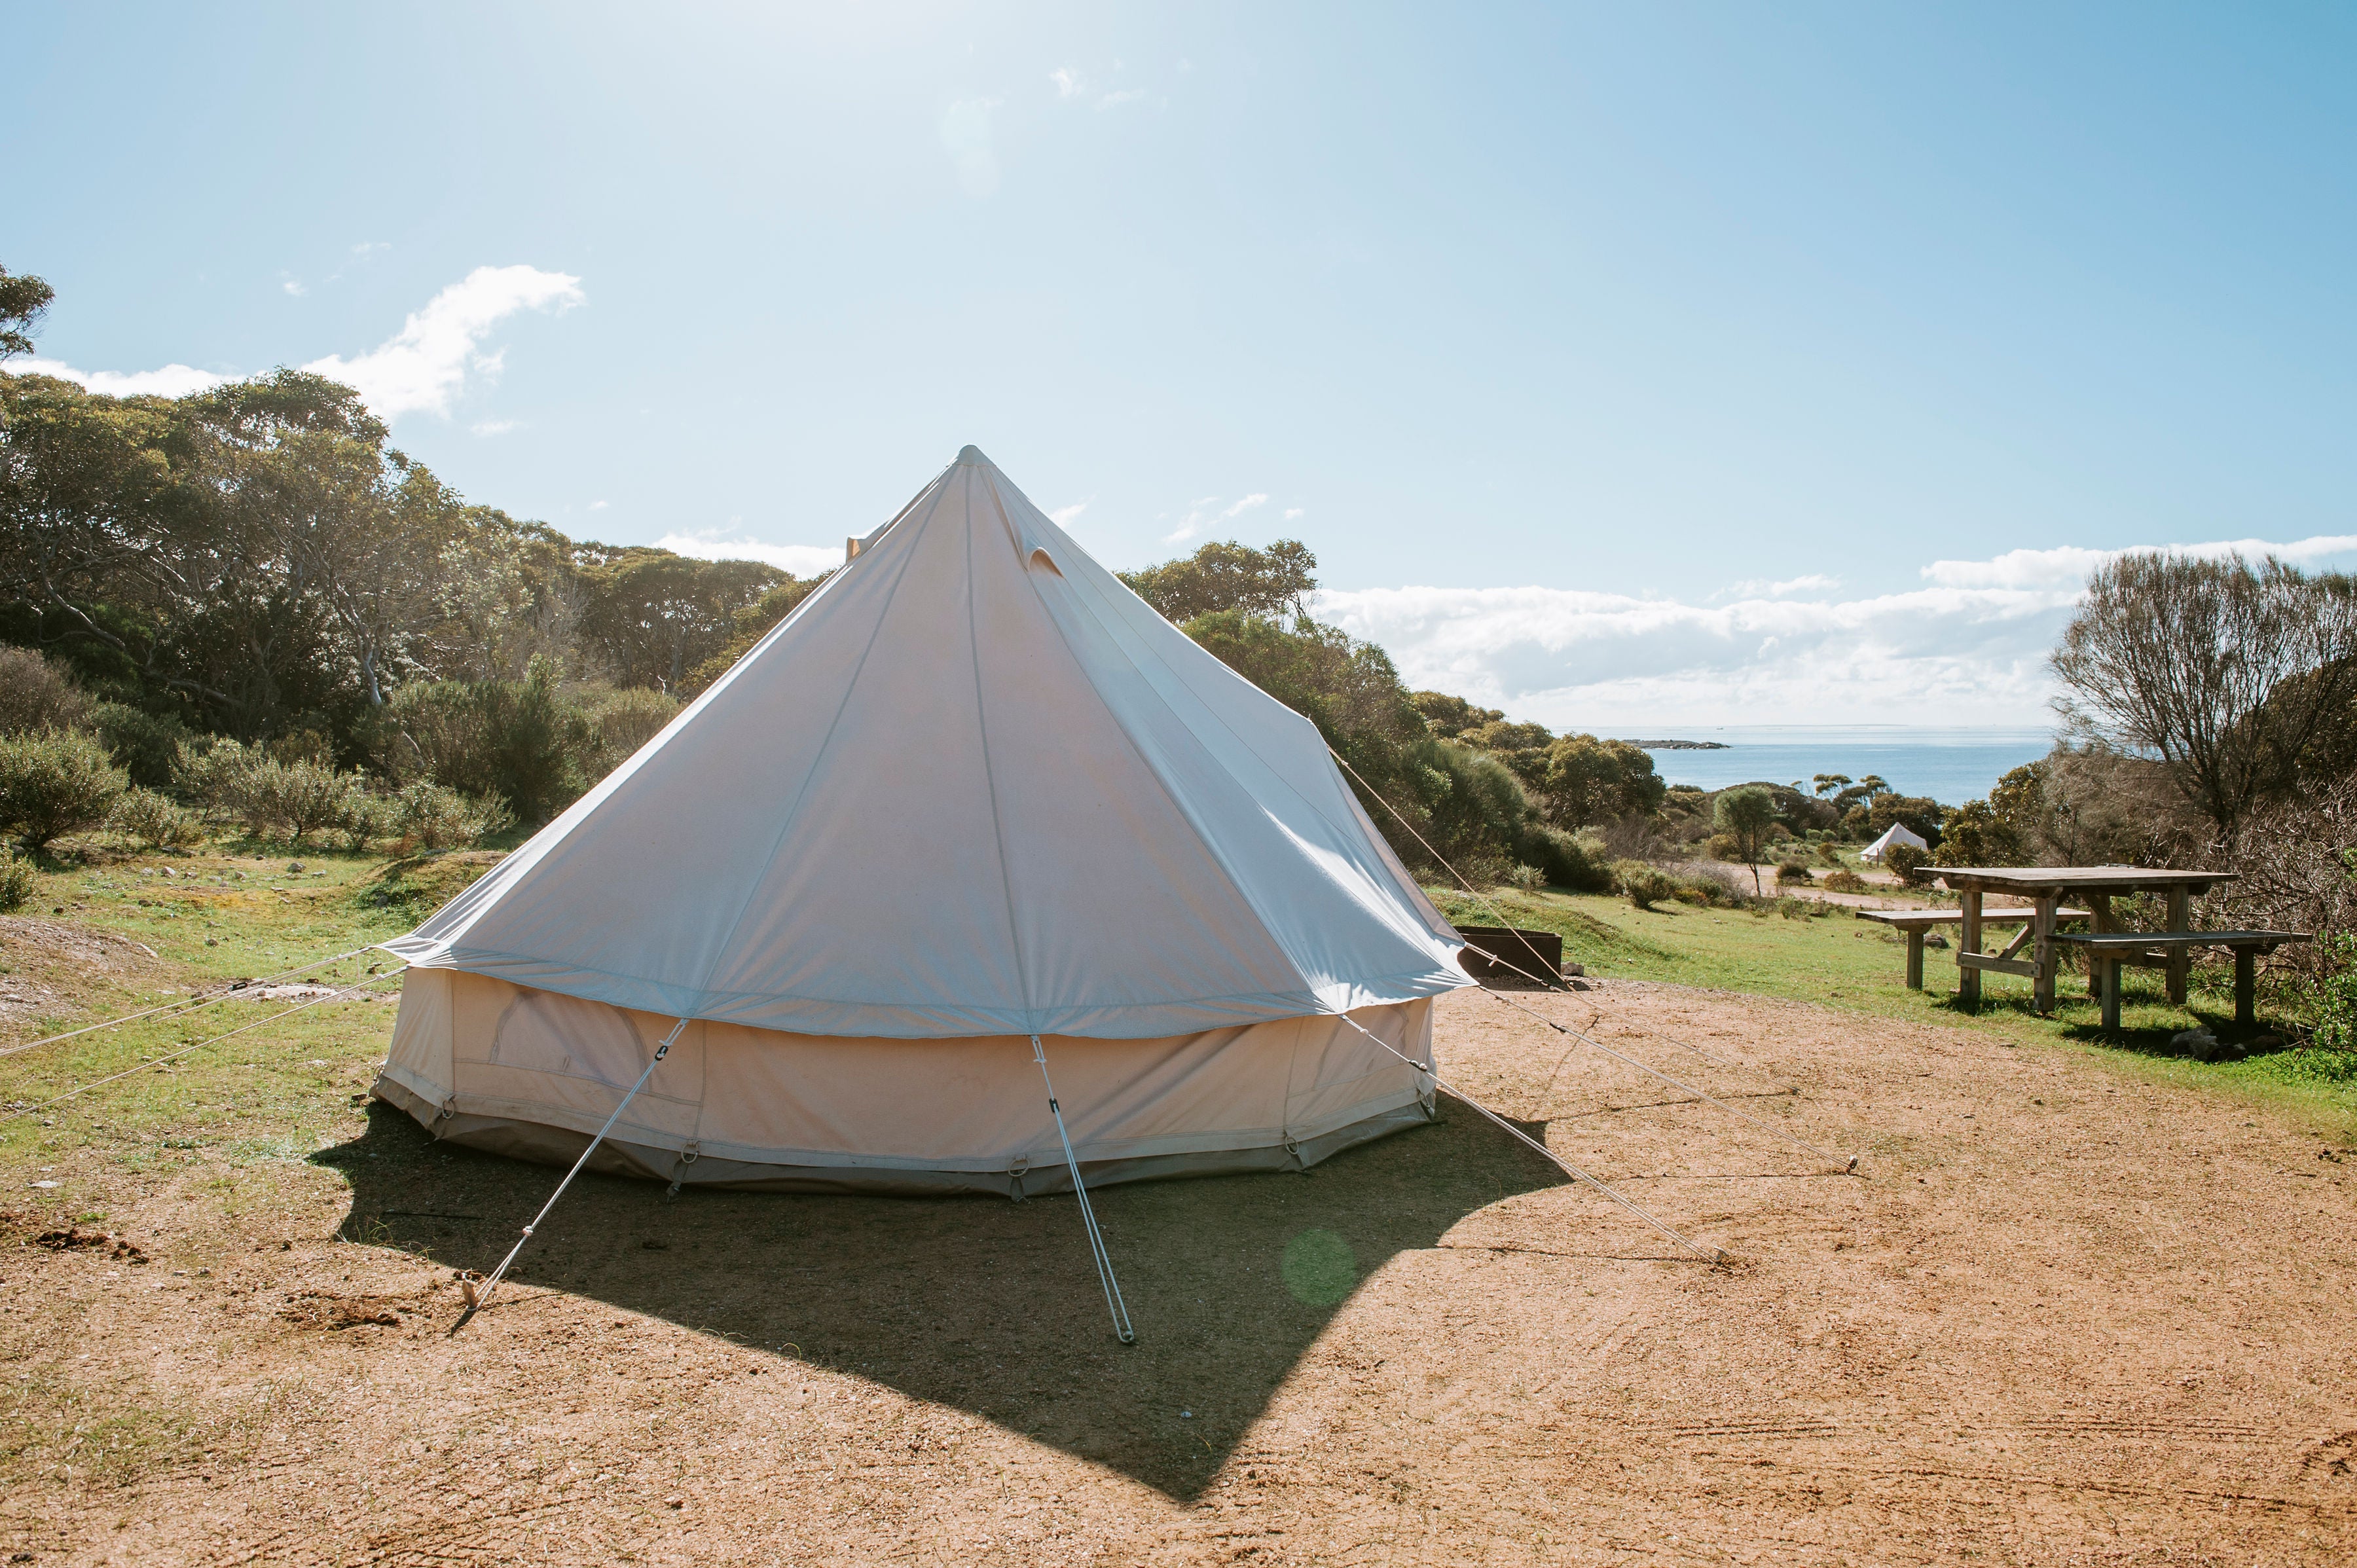 Launch Event Glamping Accommodation & Seafood Dinner SEA EAGLE SITE 19th - 20th Sept 2020 Min 2 People